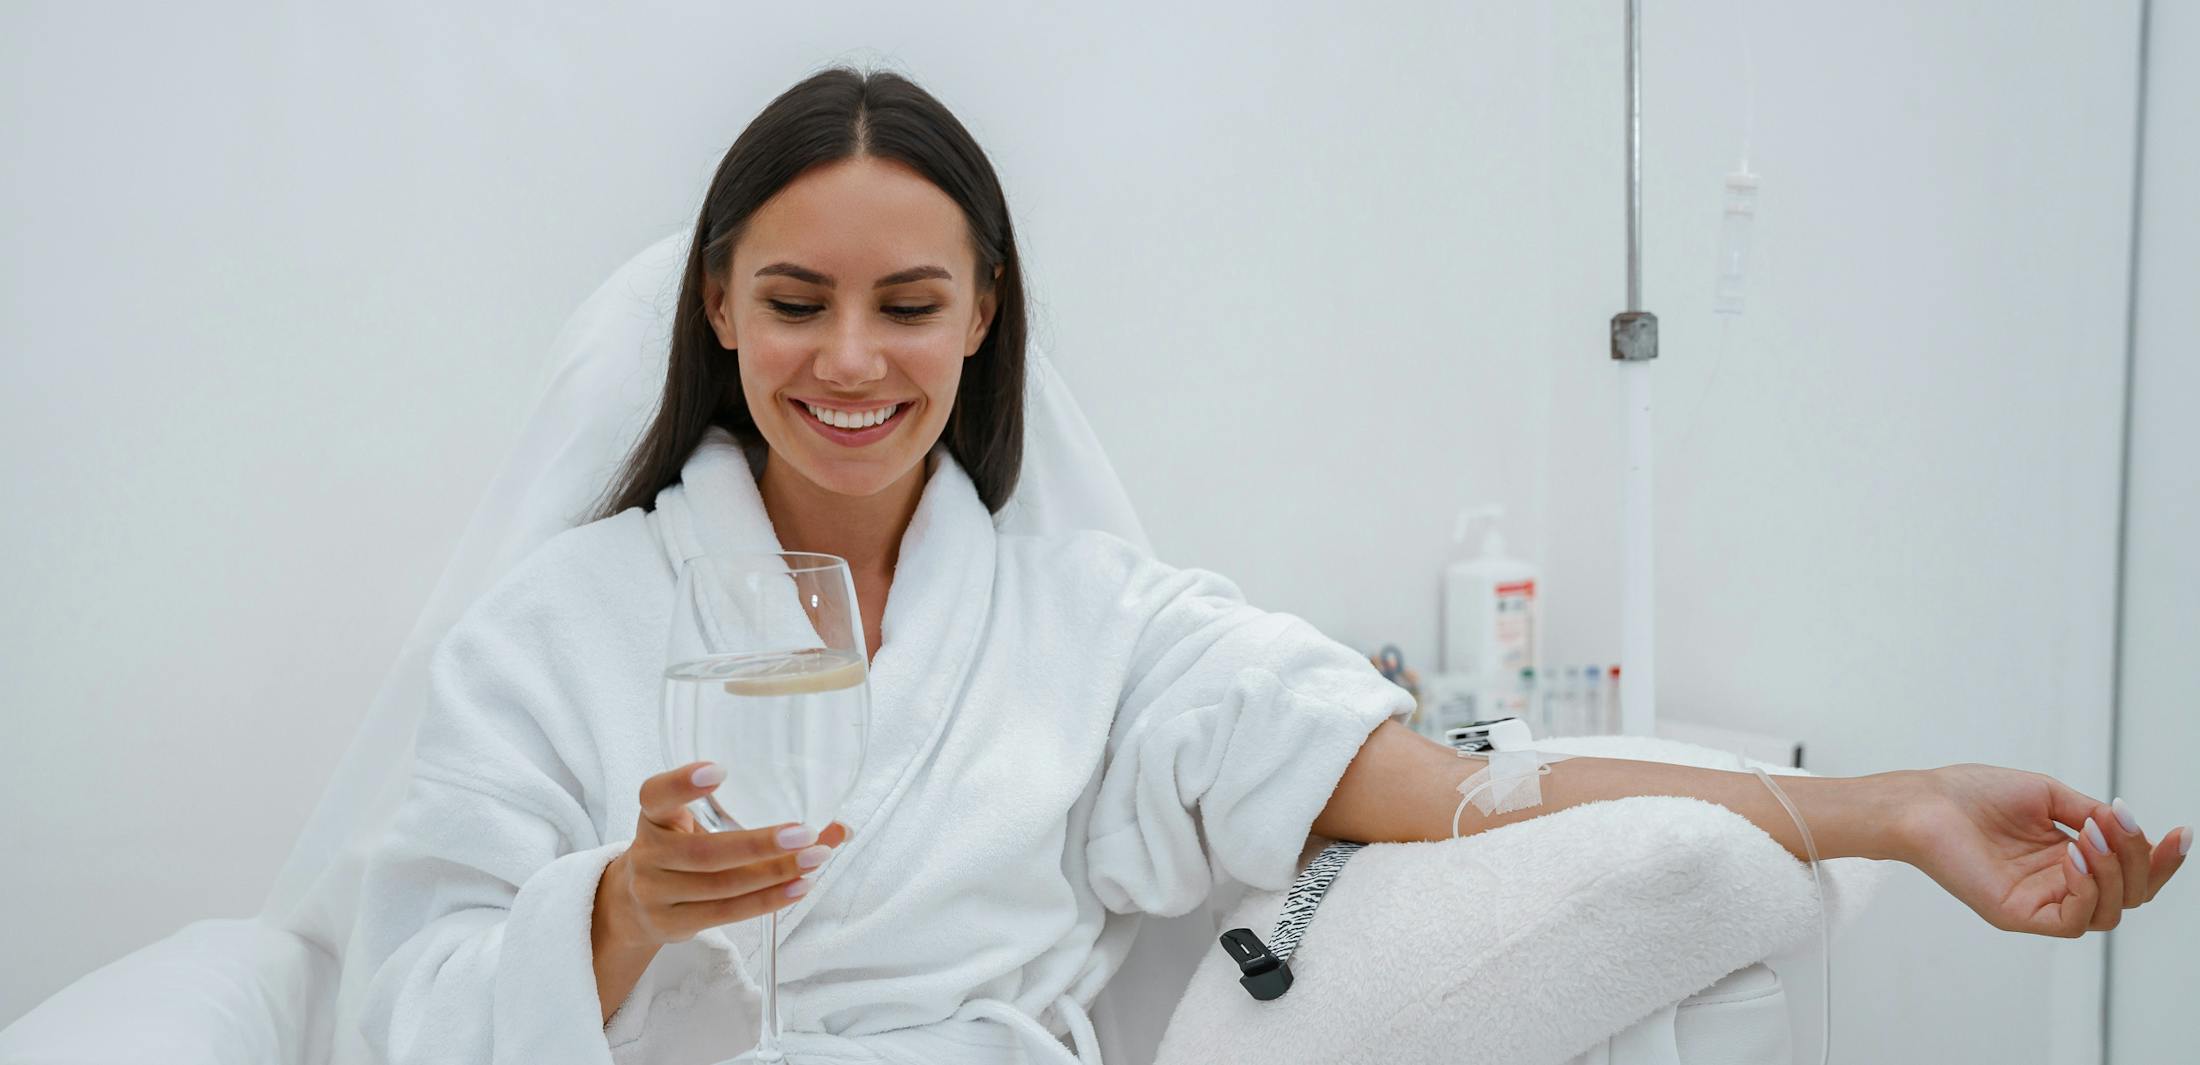 Woman receiving IV therapy while holding a glass of water